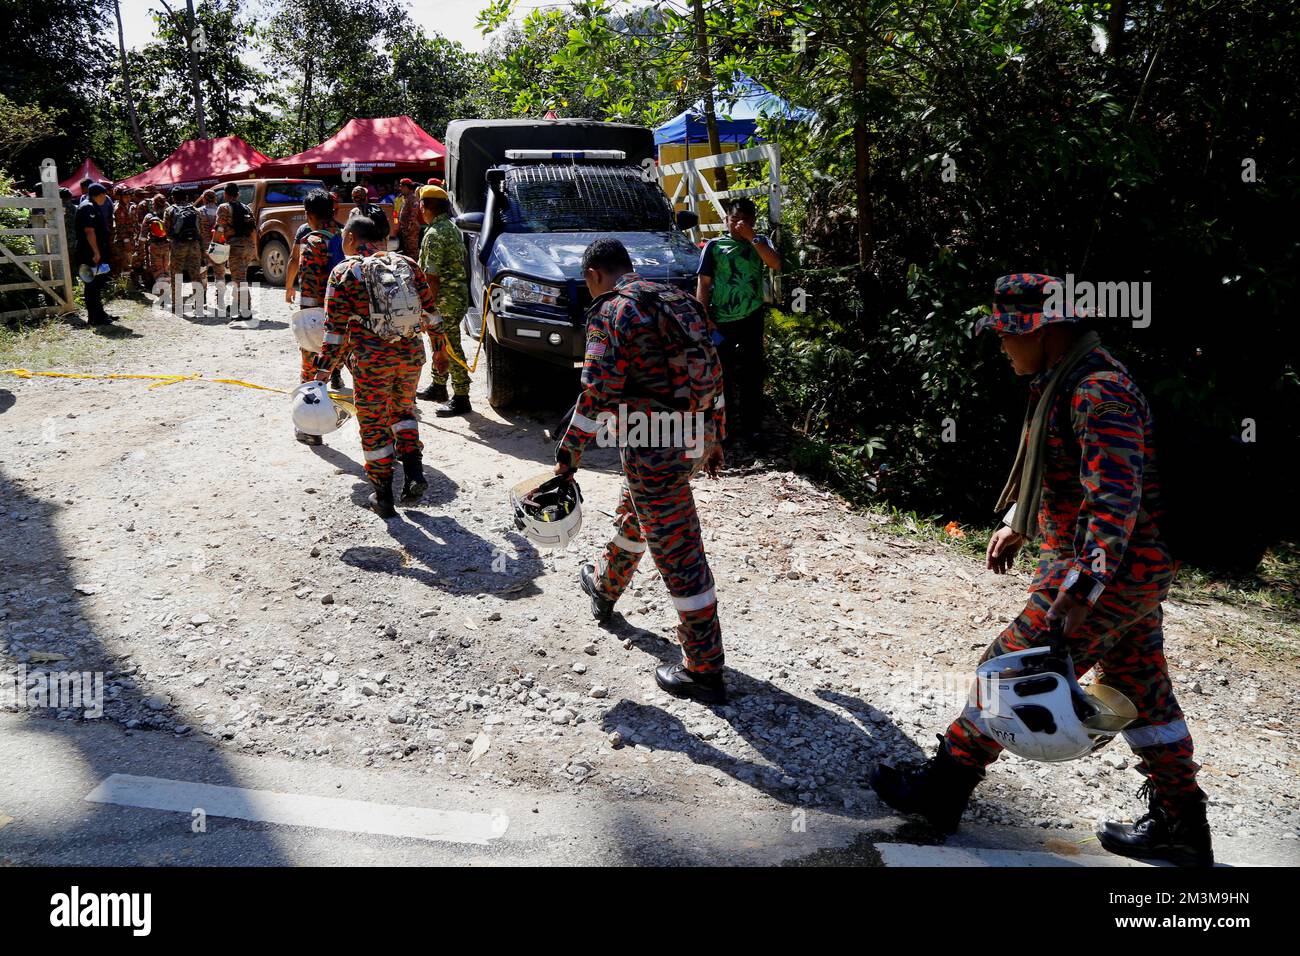 Rescue crews arrive to aid in search for victims of the landslide in Batang Kali, Selangor state, Malaysia December 16, 2022. REUTERS/Lai Seng Sin Stock Photo